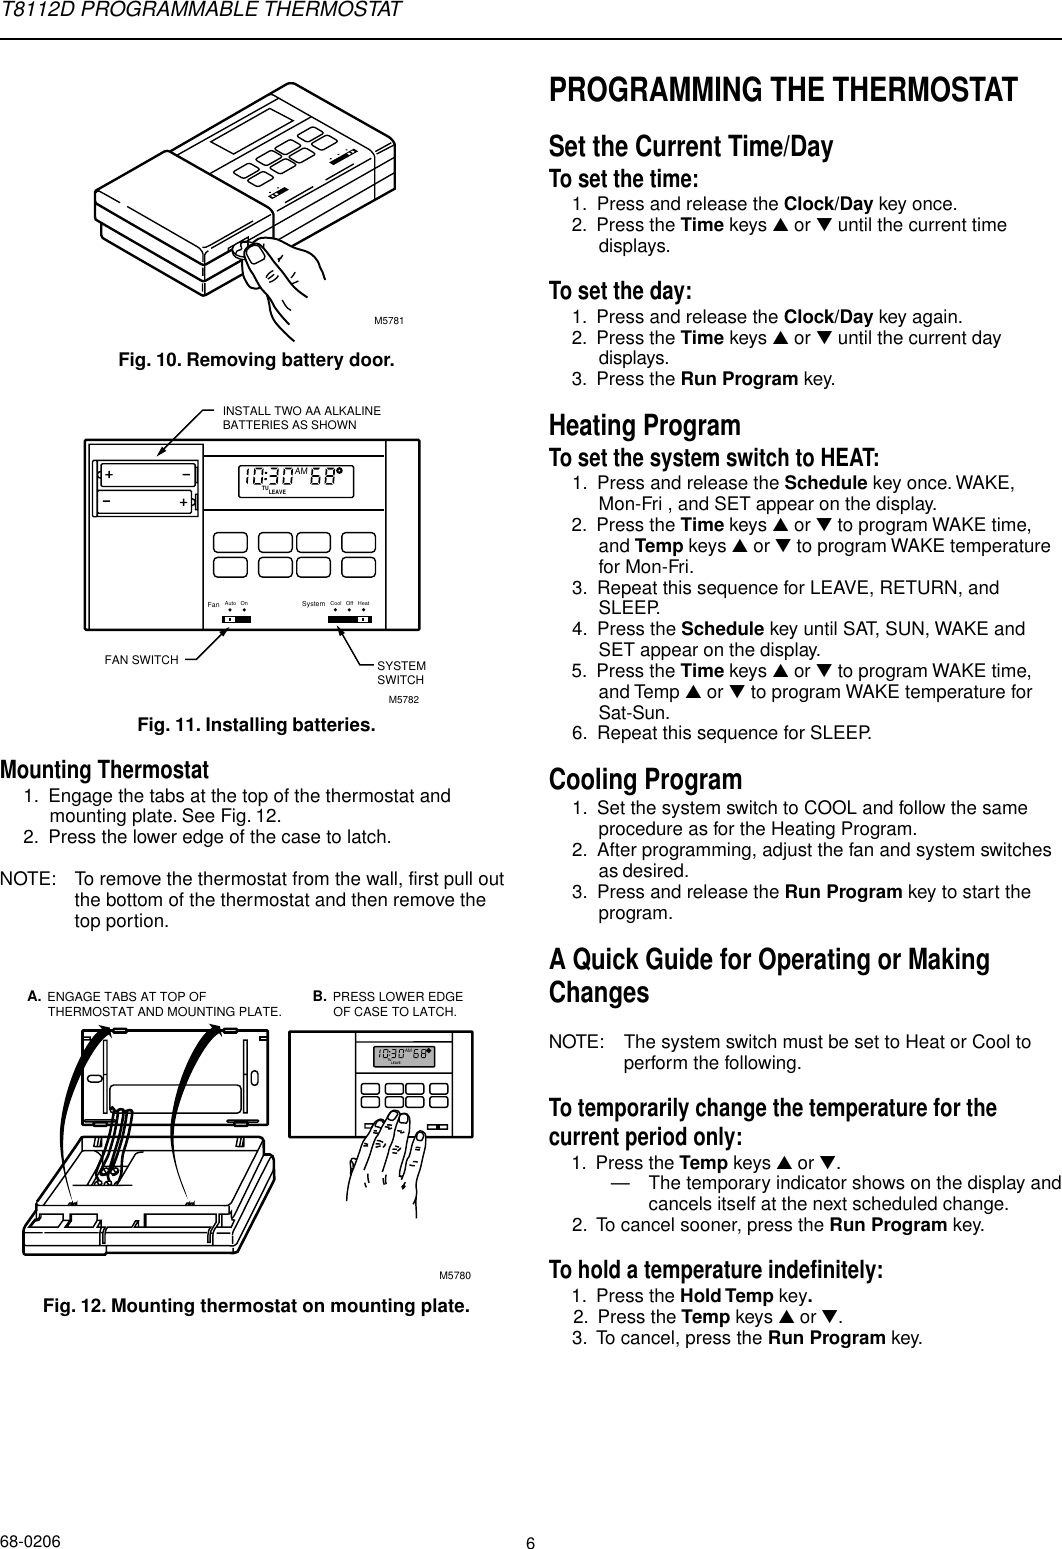 Page 6 of 8 - Honeywell Honeywell-T8112D-Owners-Manual- 68-0170 - T8112 Programmable Thermostat  Honeywell-t8112d-owners-manual